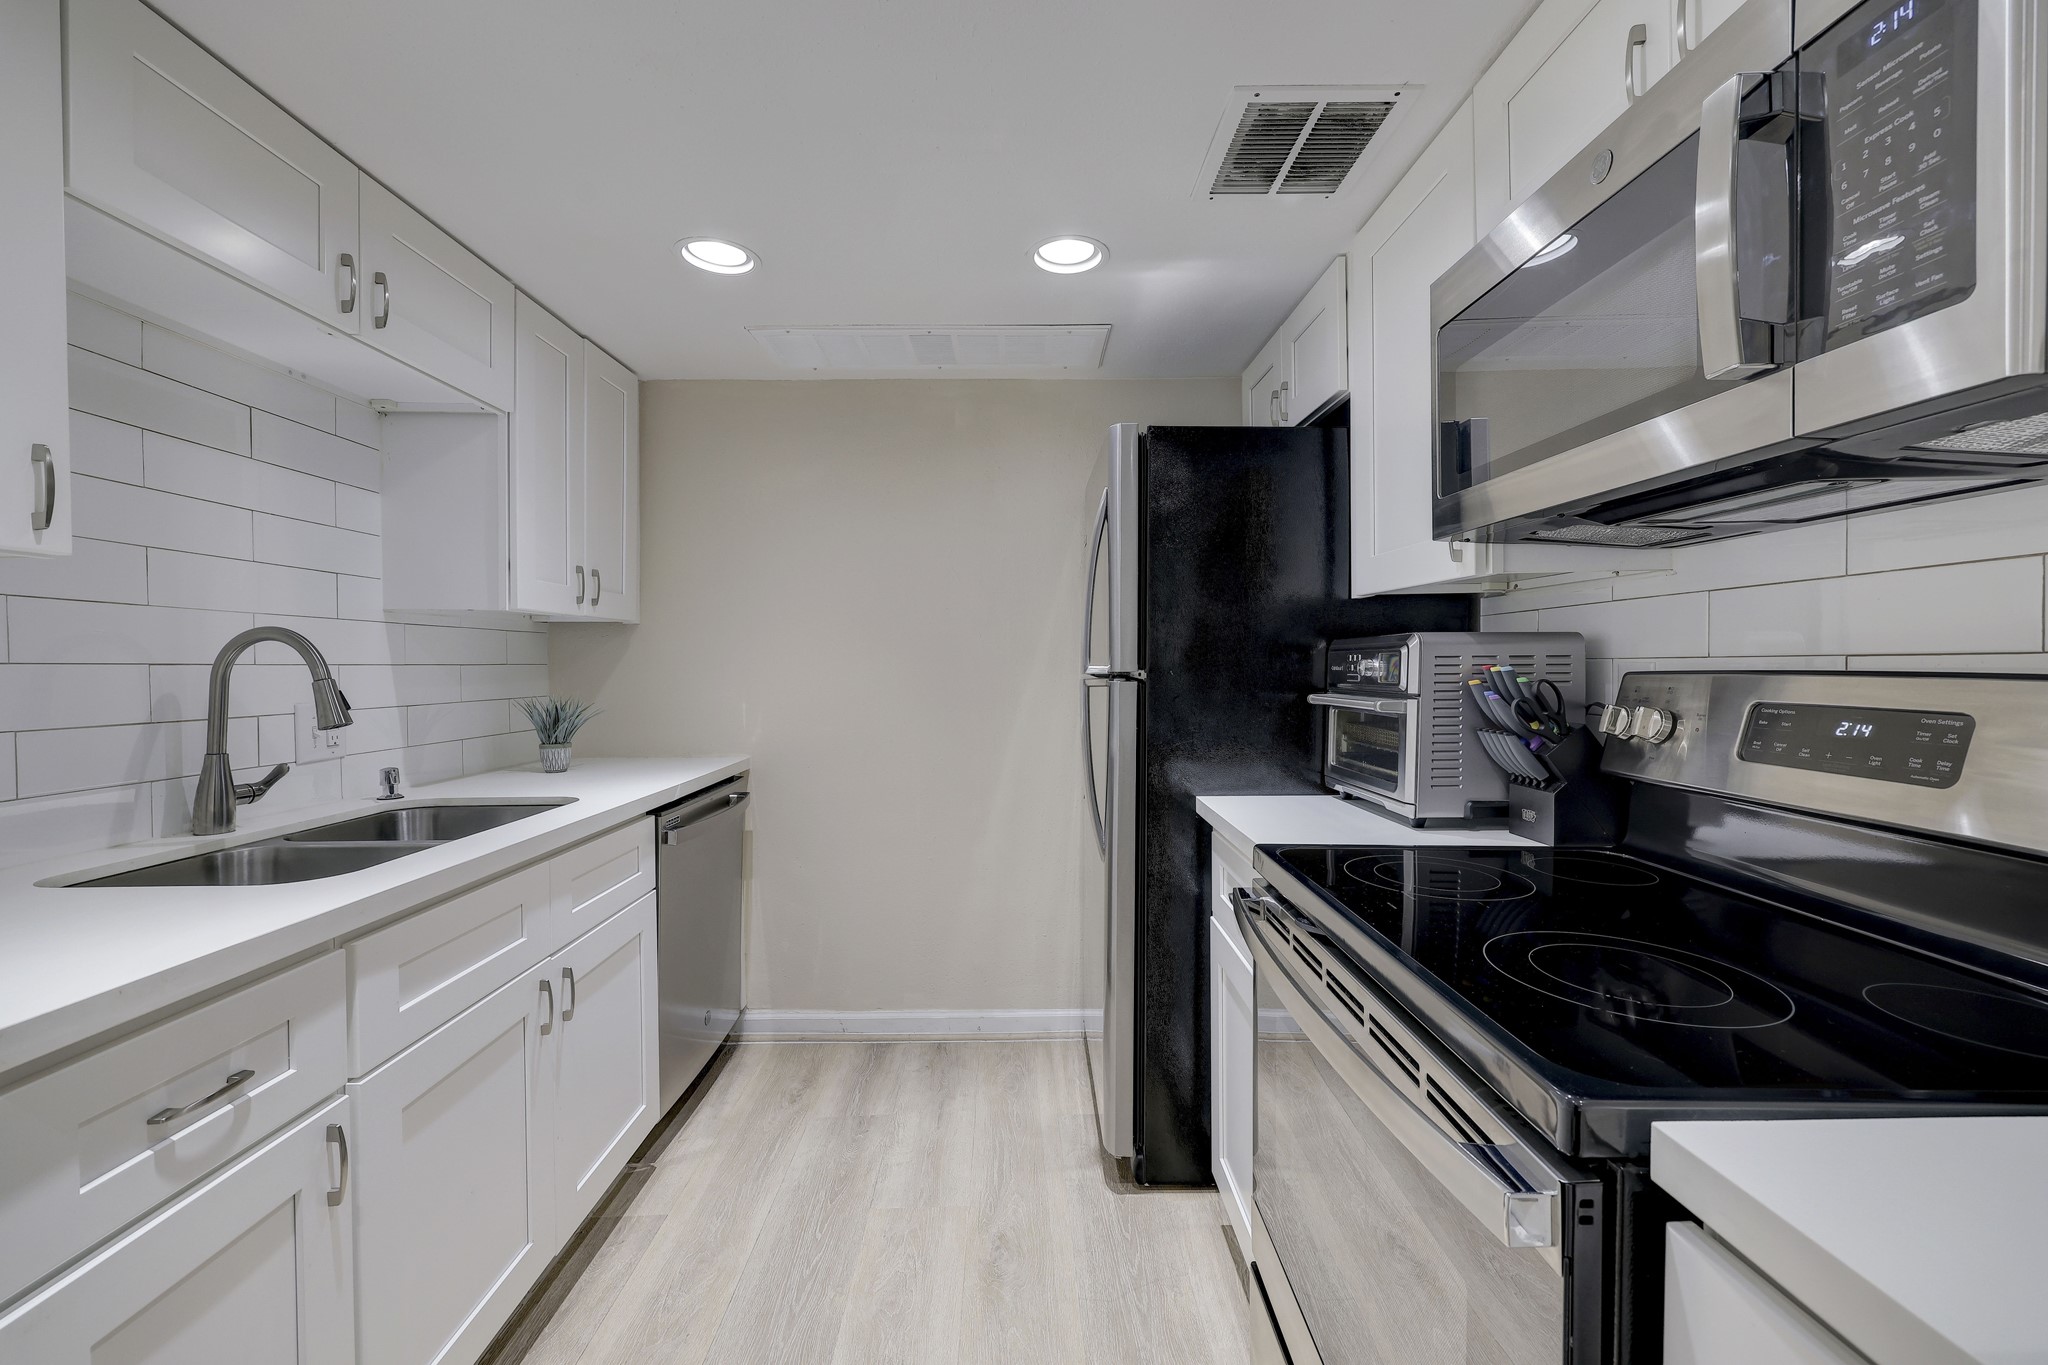 Chef's Dream! Lots of space and storage for all the chef appliances small and large!